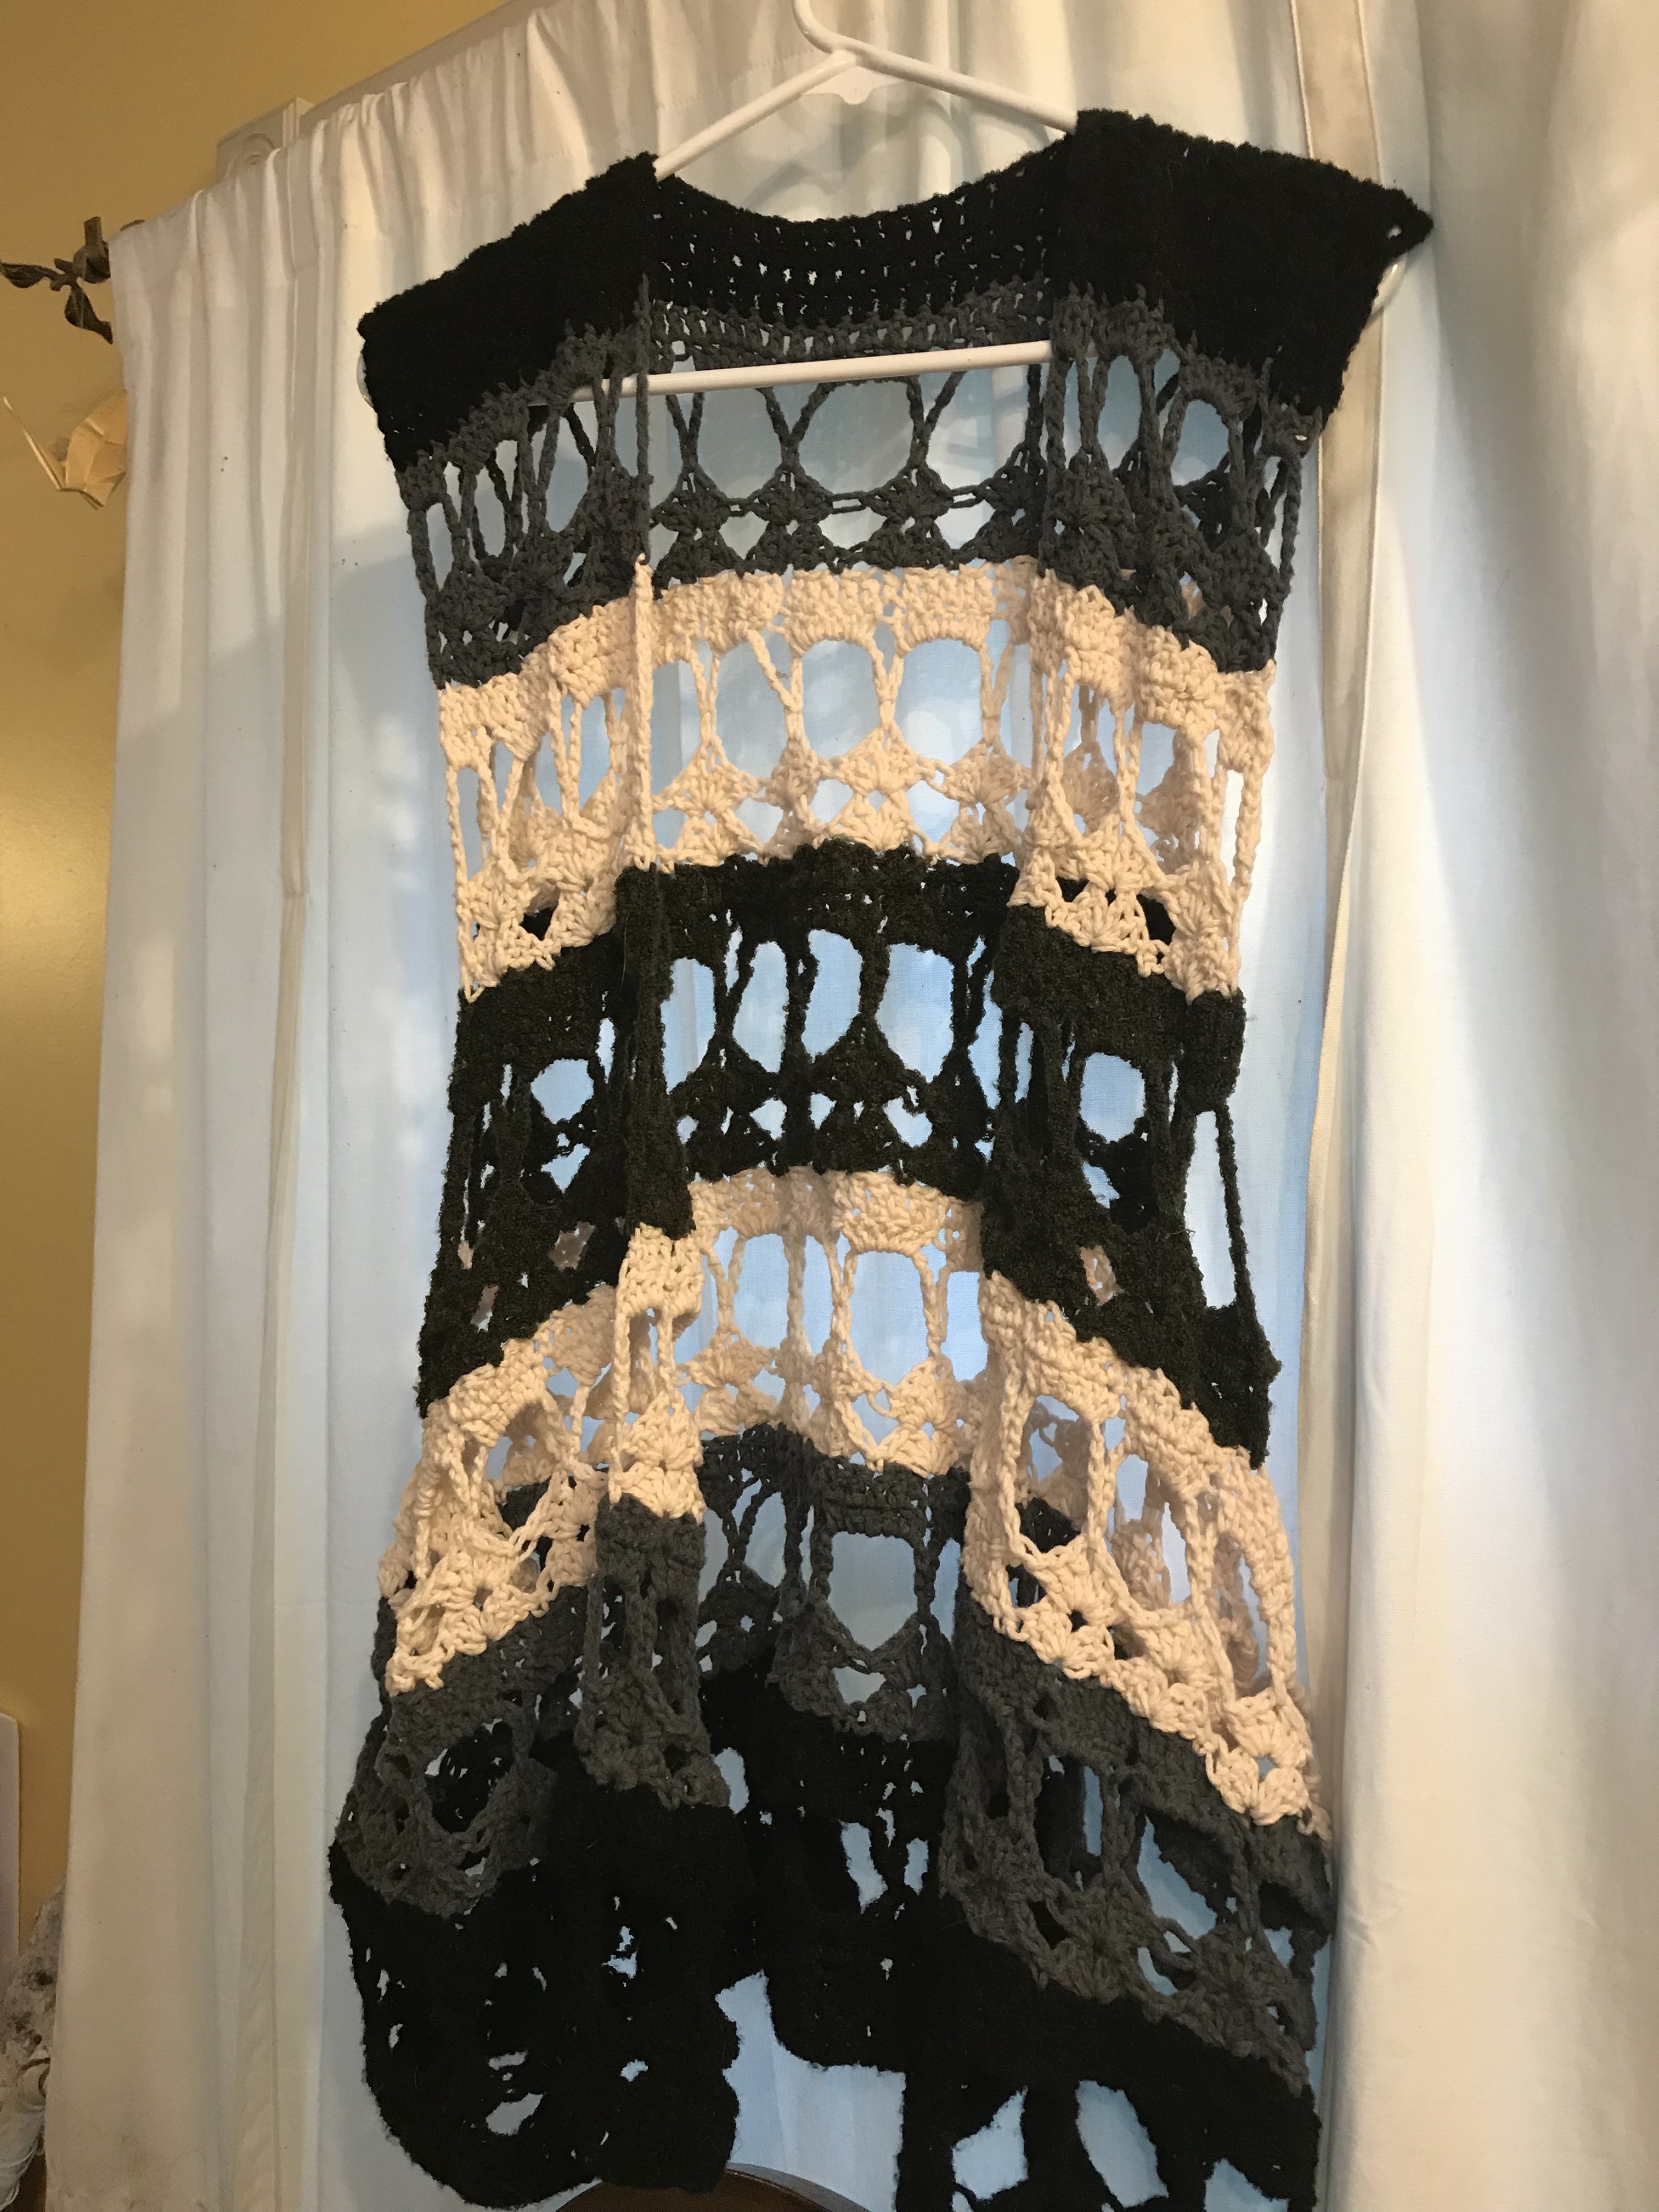 Photo of a crocheted vest hanging in front of a white window curtain. The vest has one central dark green stripe surrounded by two stripes each of white, gray, and black: the colors, more or less, of the agender pride flag